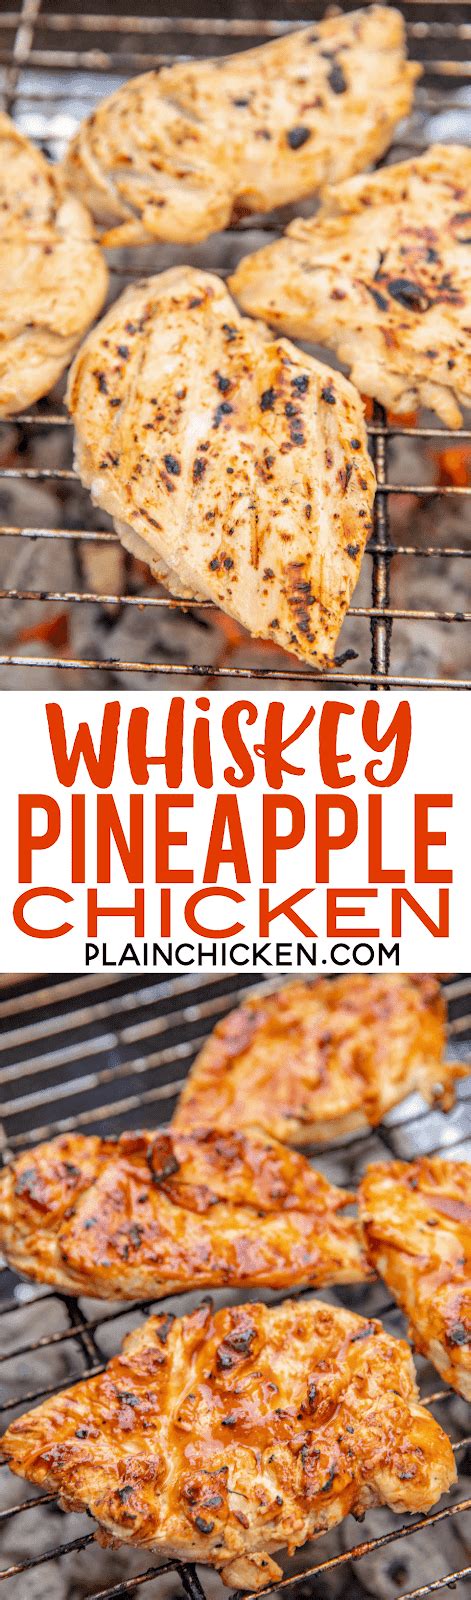 Food on a stick is a winner for both kids and adults! Whiskey Pineapple Chicken - Plain Chicken